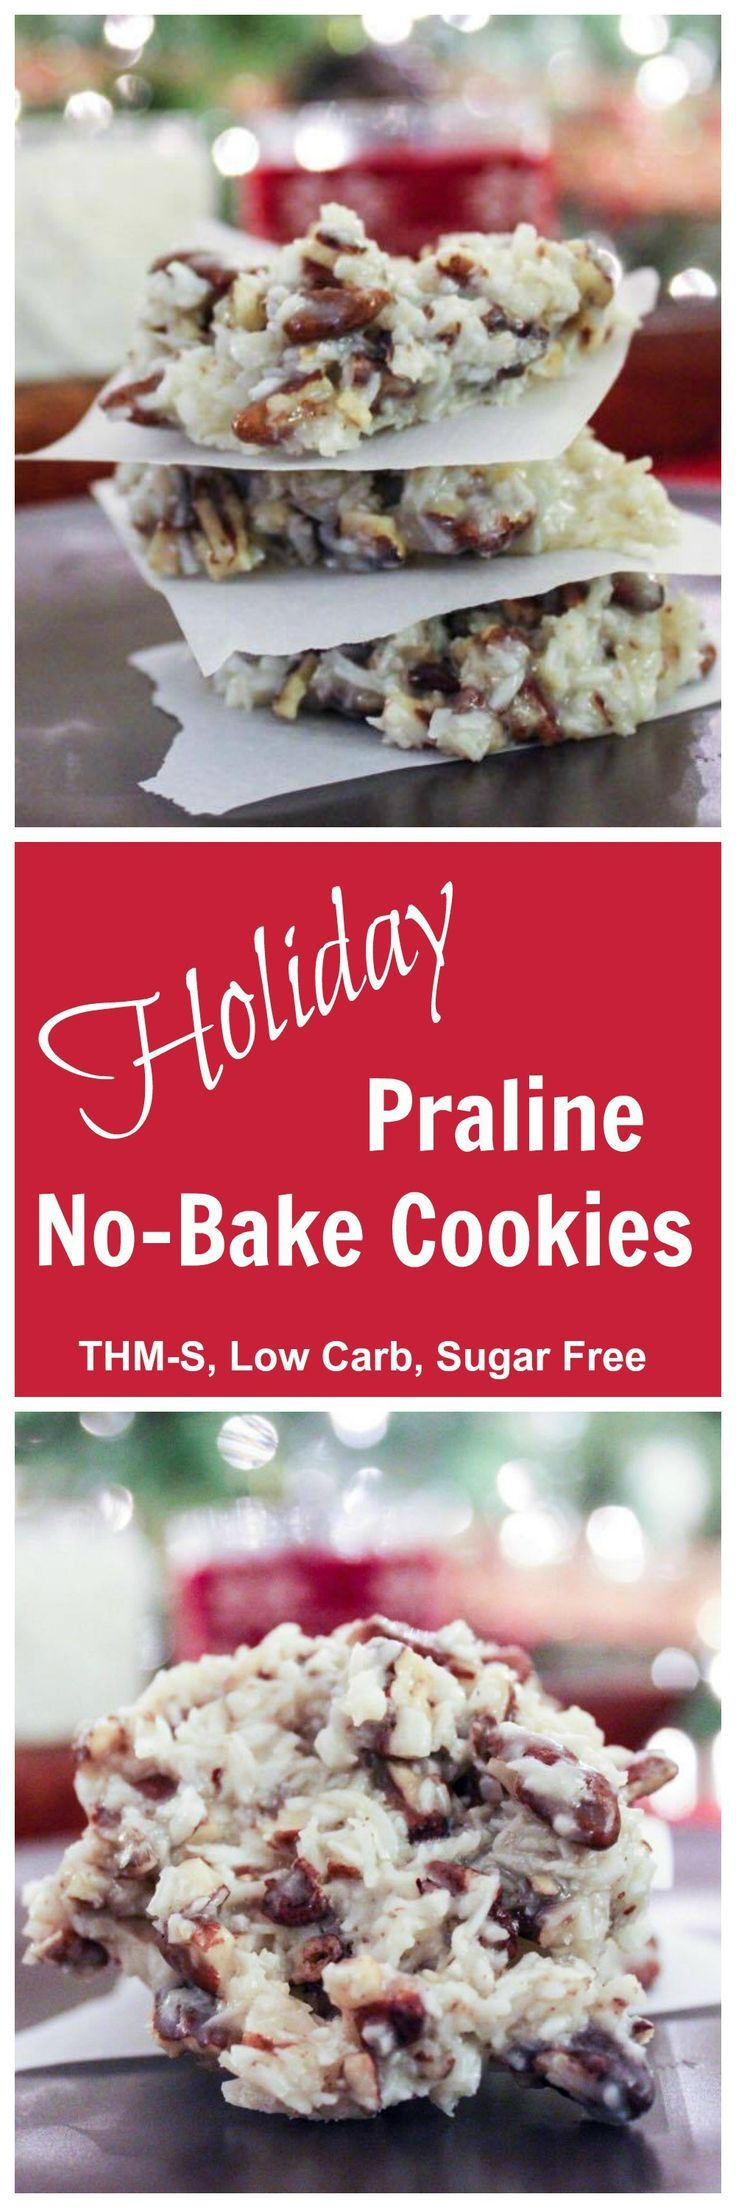 Sugar Free Christmas Candy Recipes
 Best 25 No bake christmas cookies ideas on Pinterest